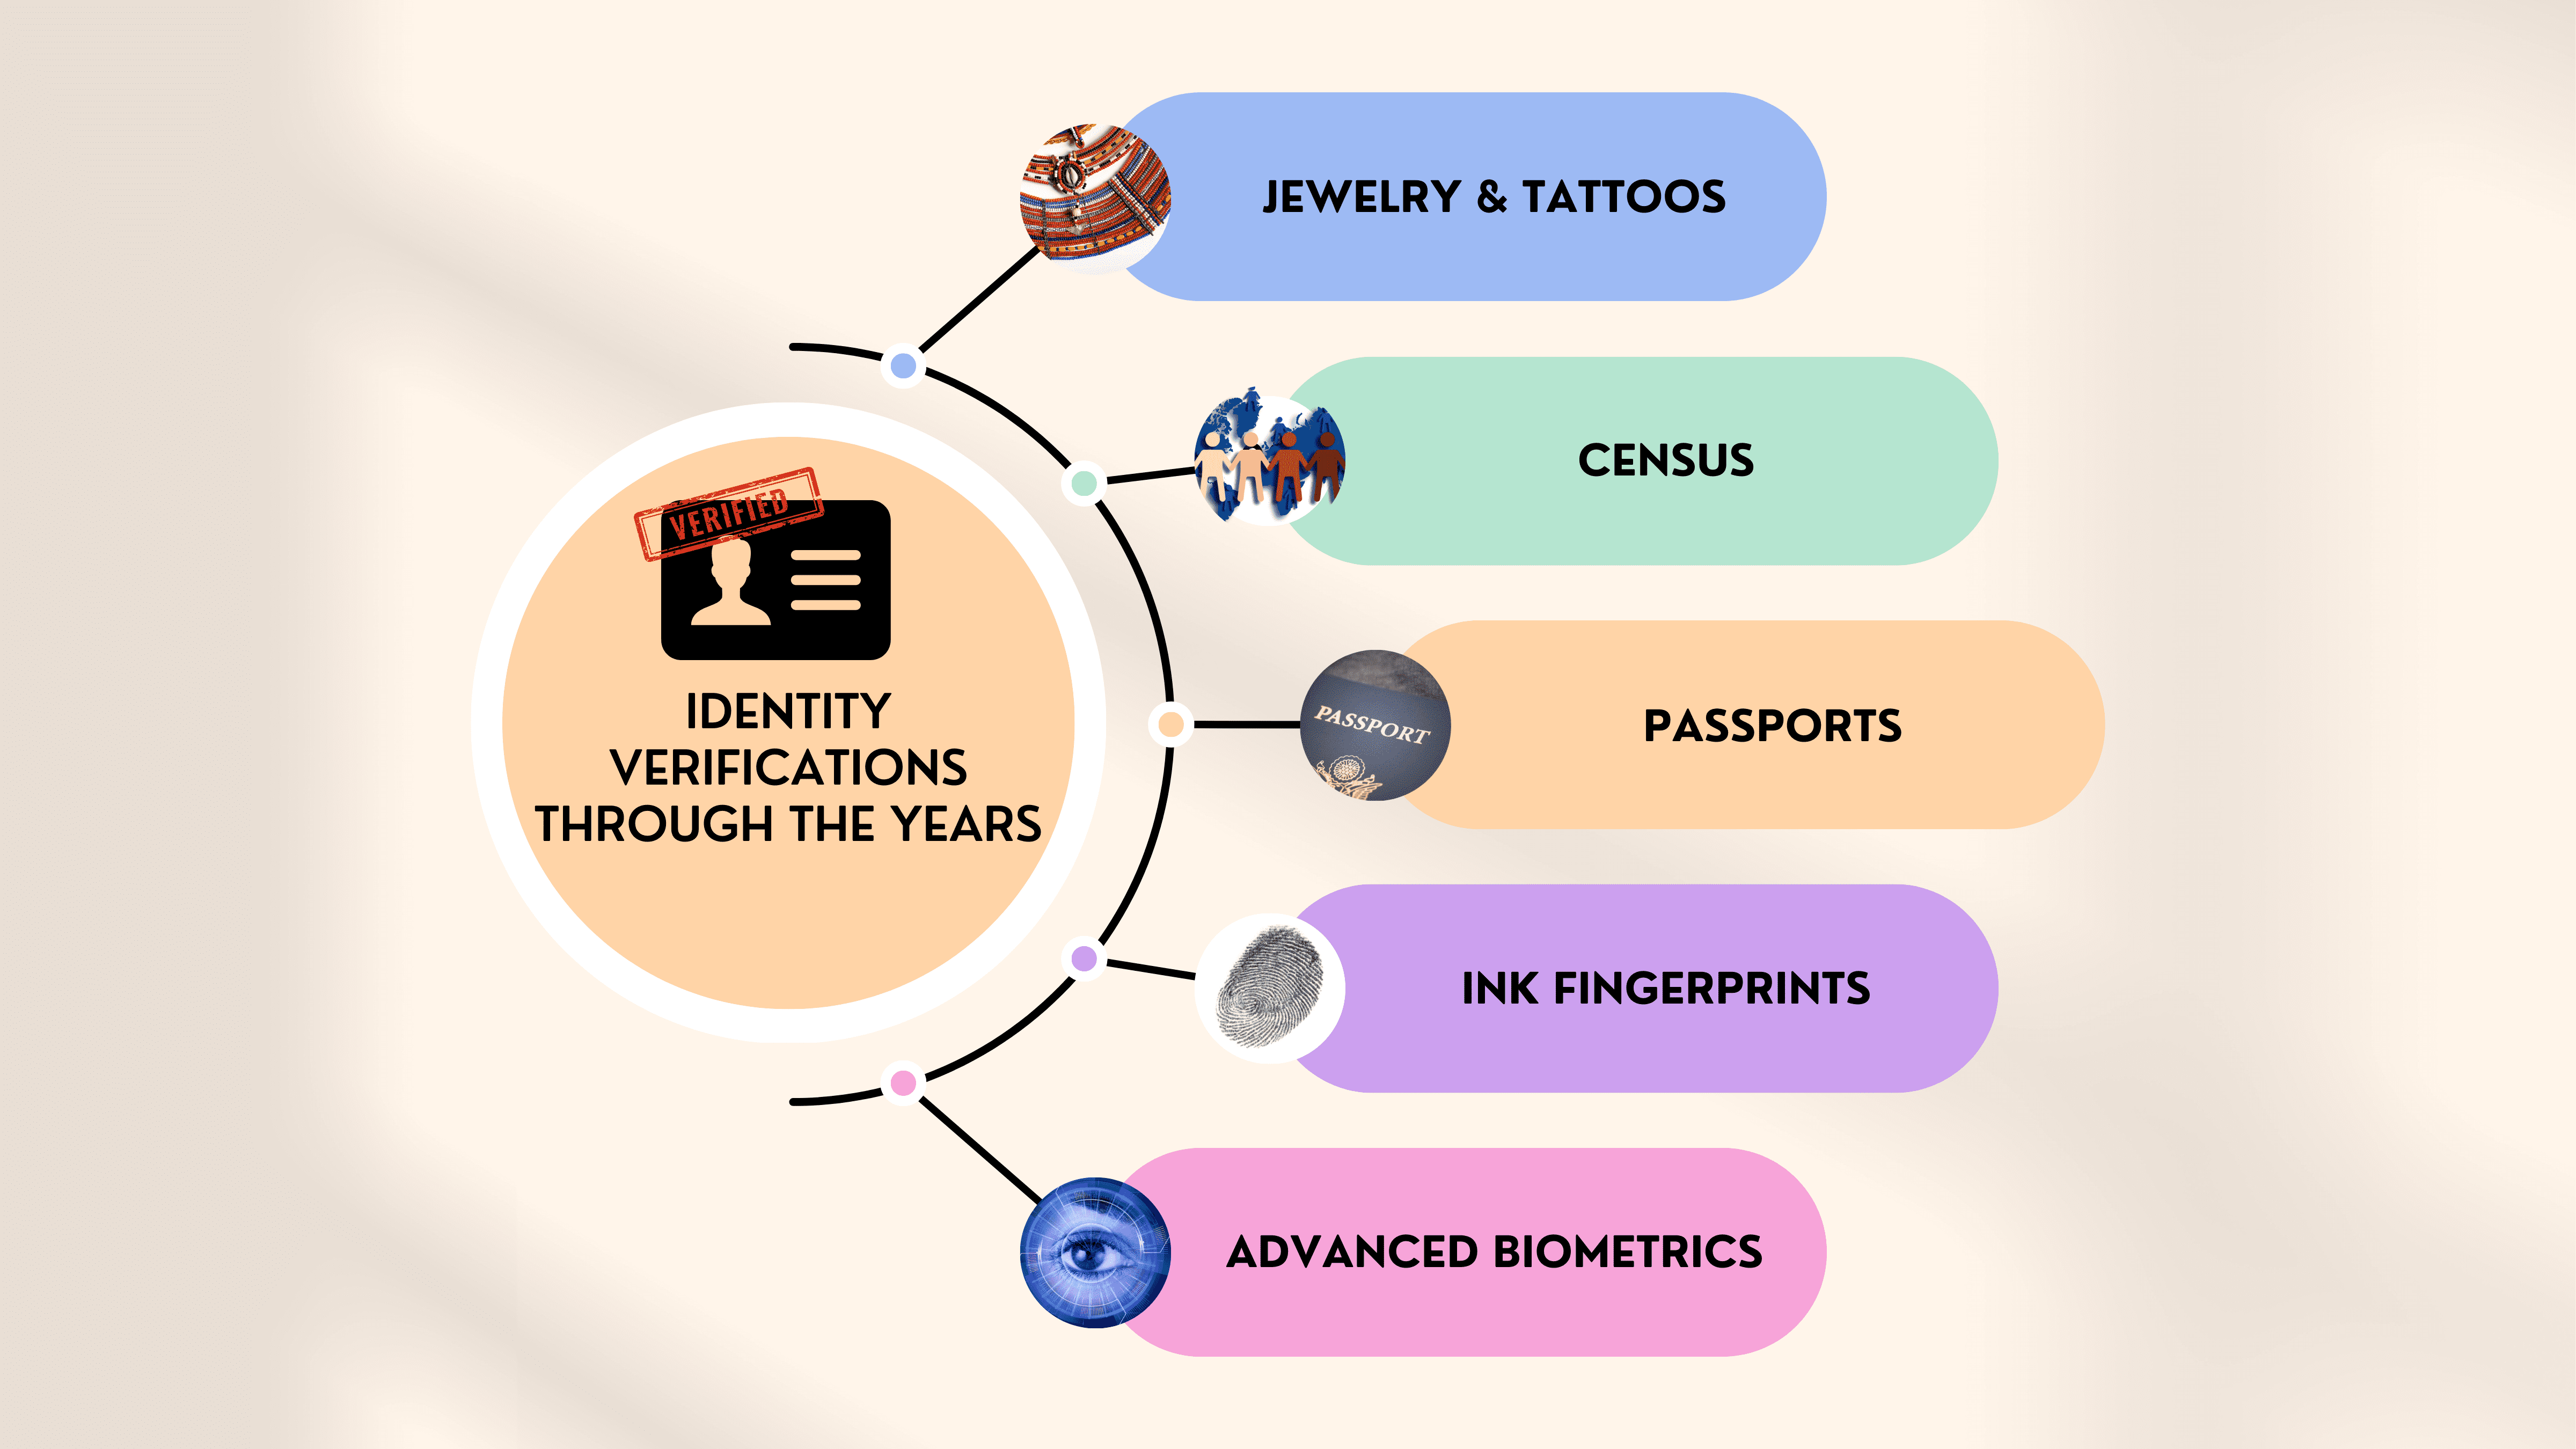 Identity verifications through the years - A short history